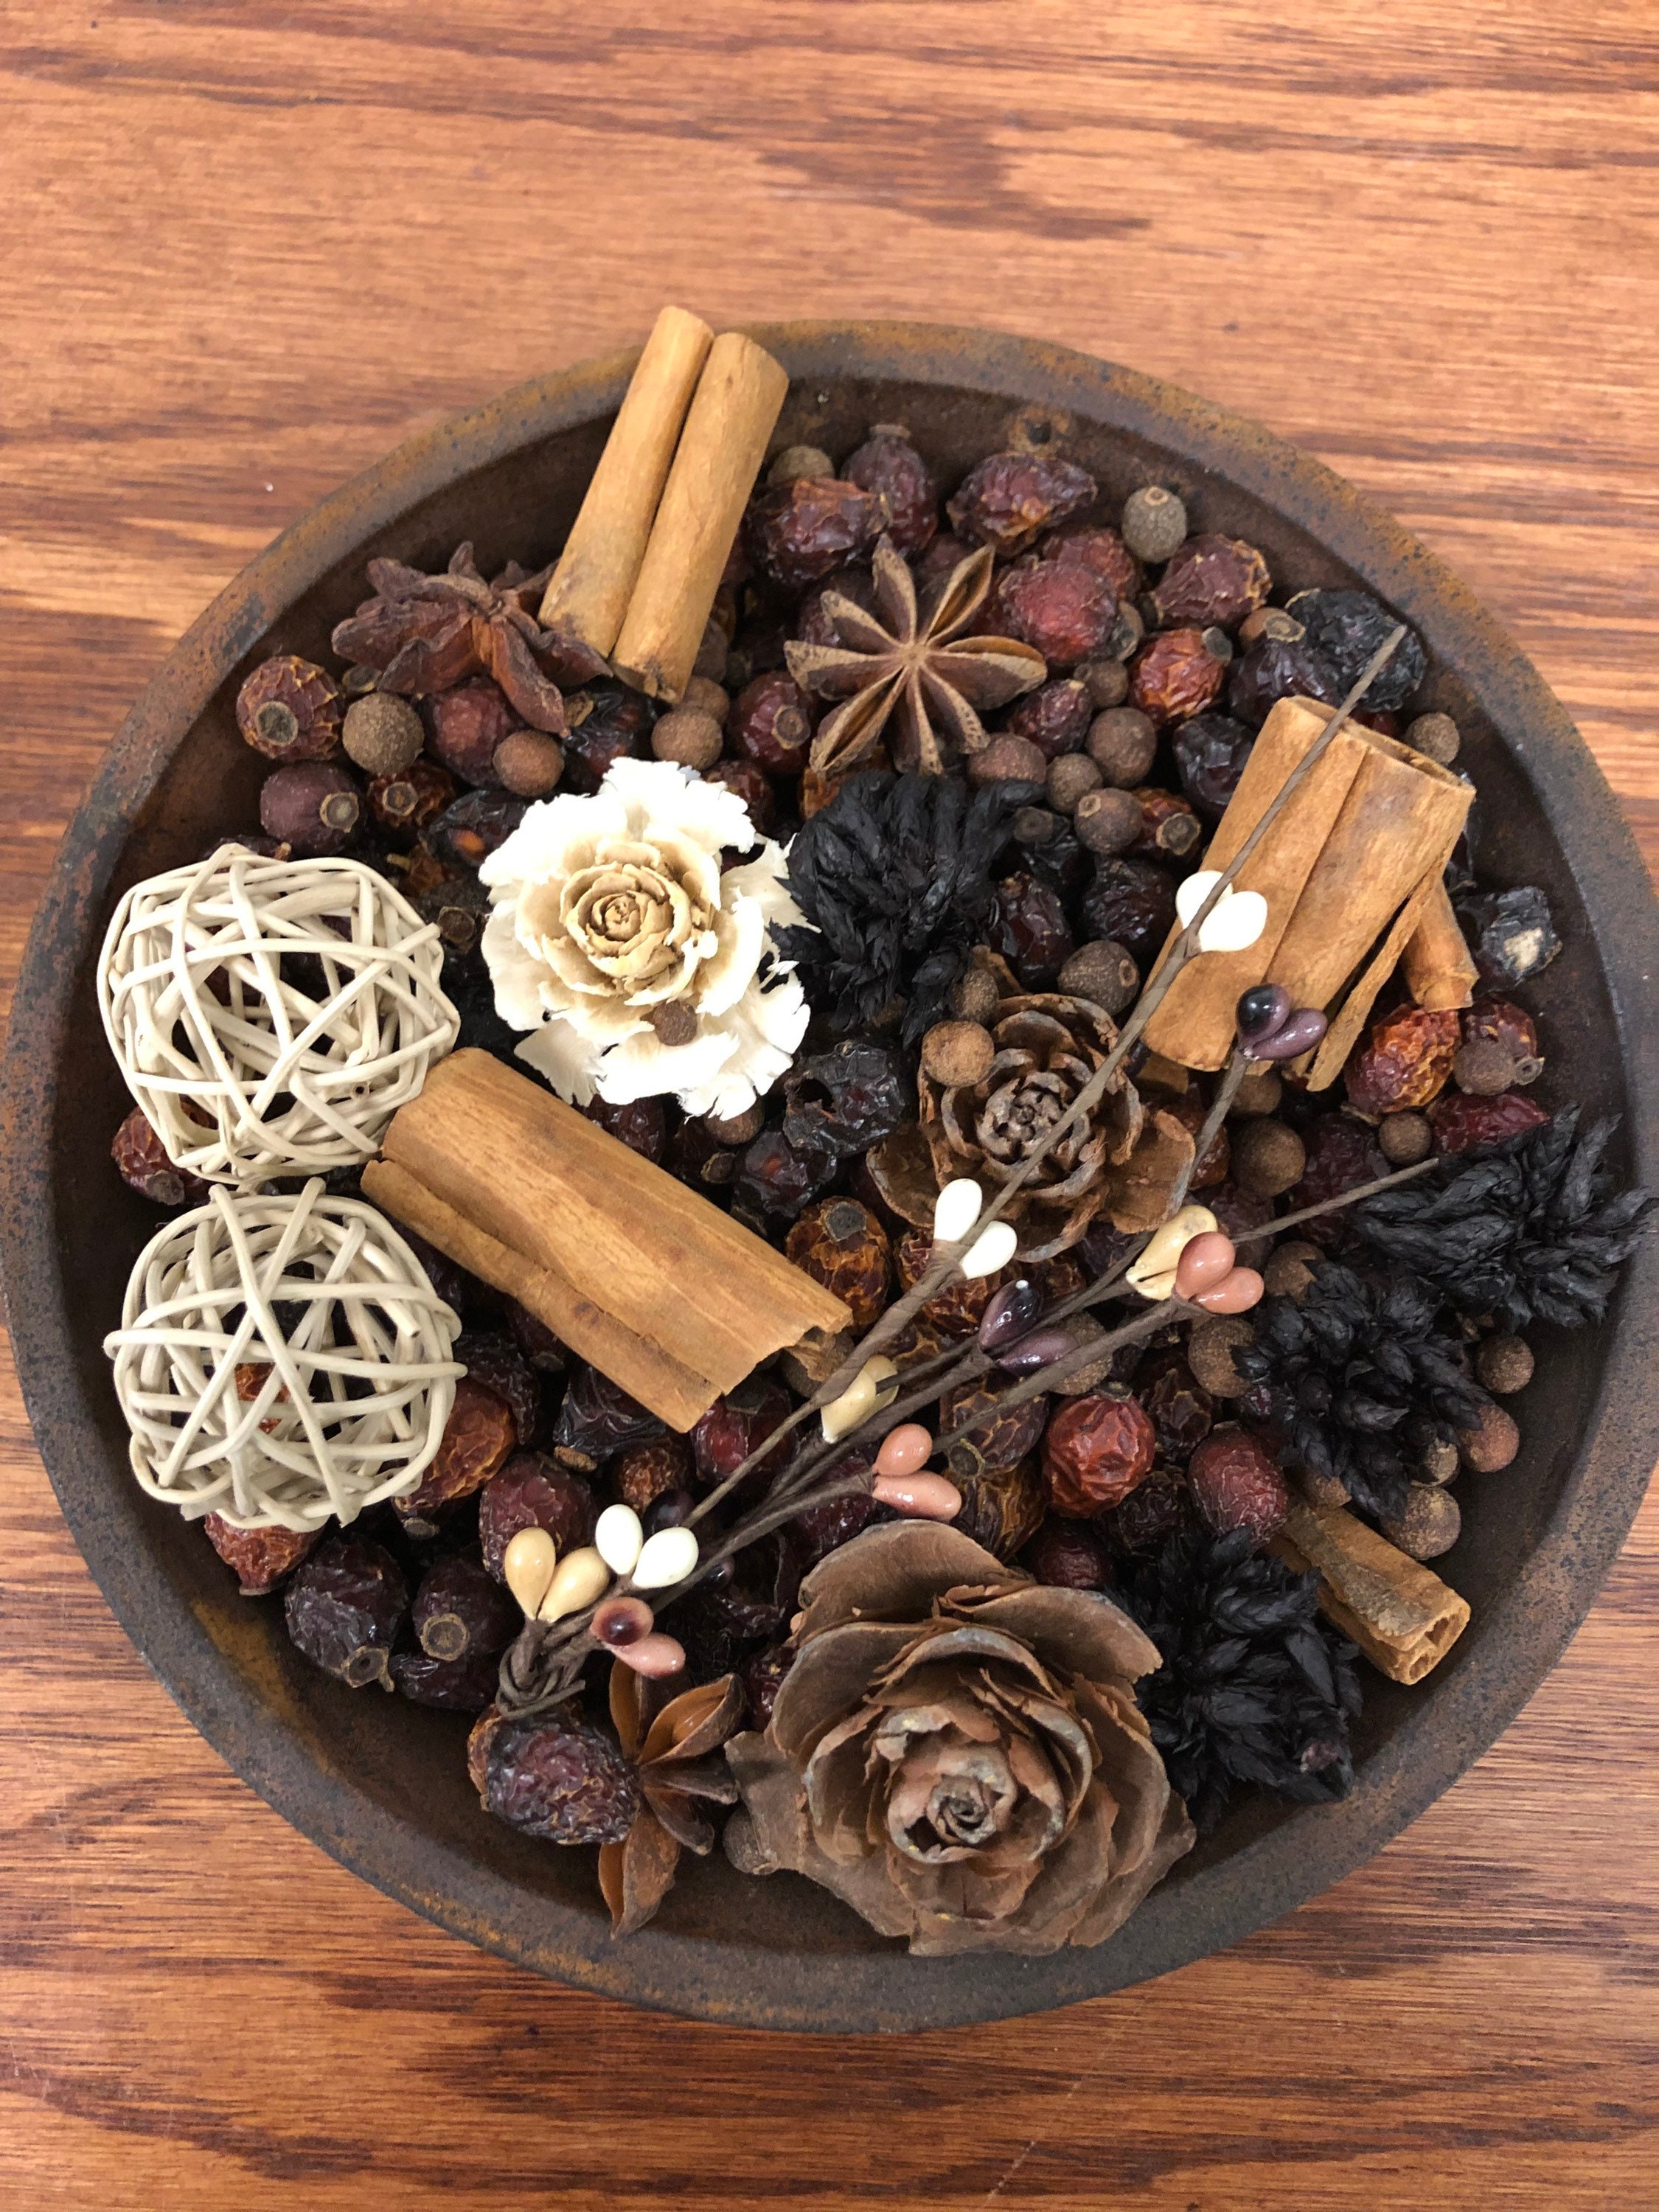 Home Sweet Home Potpourri. Cinnamon, Anise Stars, Cloves, Pantry Apples,  Cedar Tips , Berries and Plenty of Other Unique Pods. 6 Oz Bag 